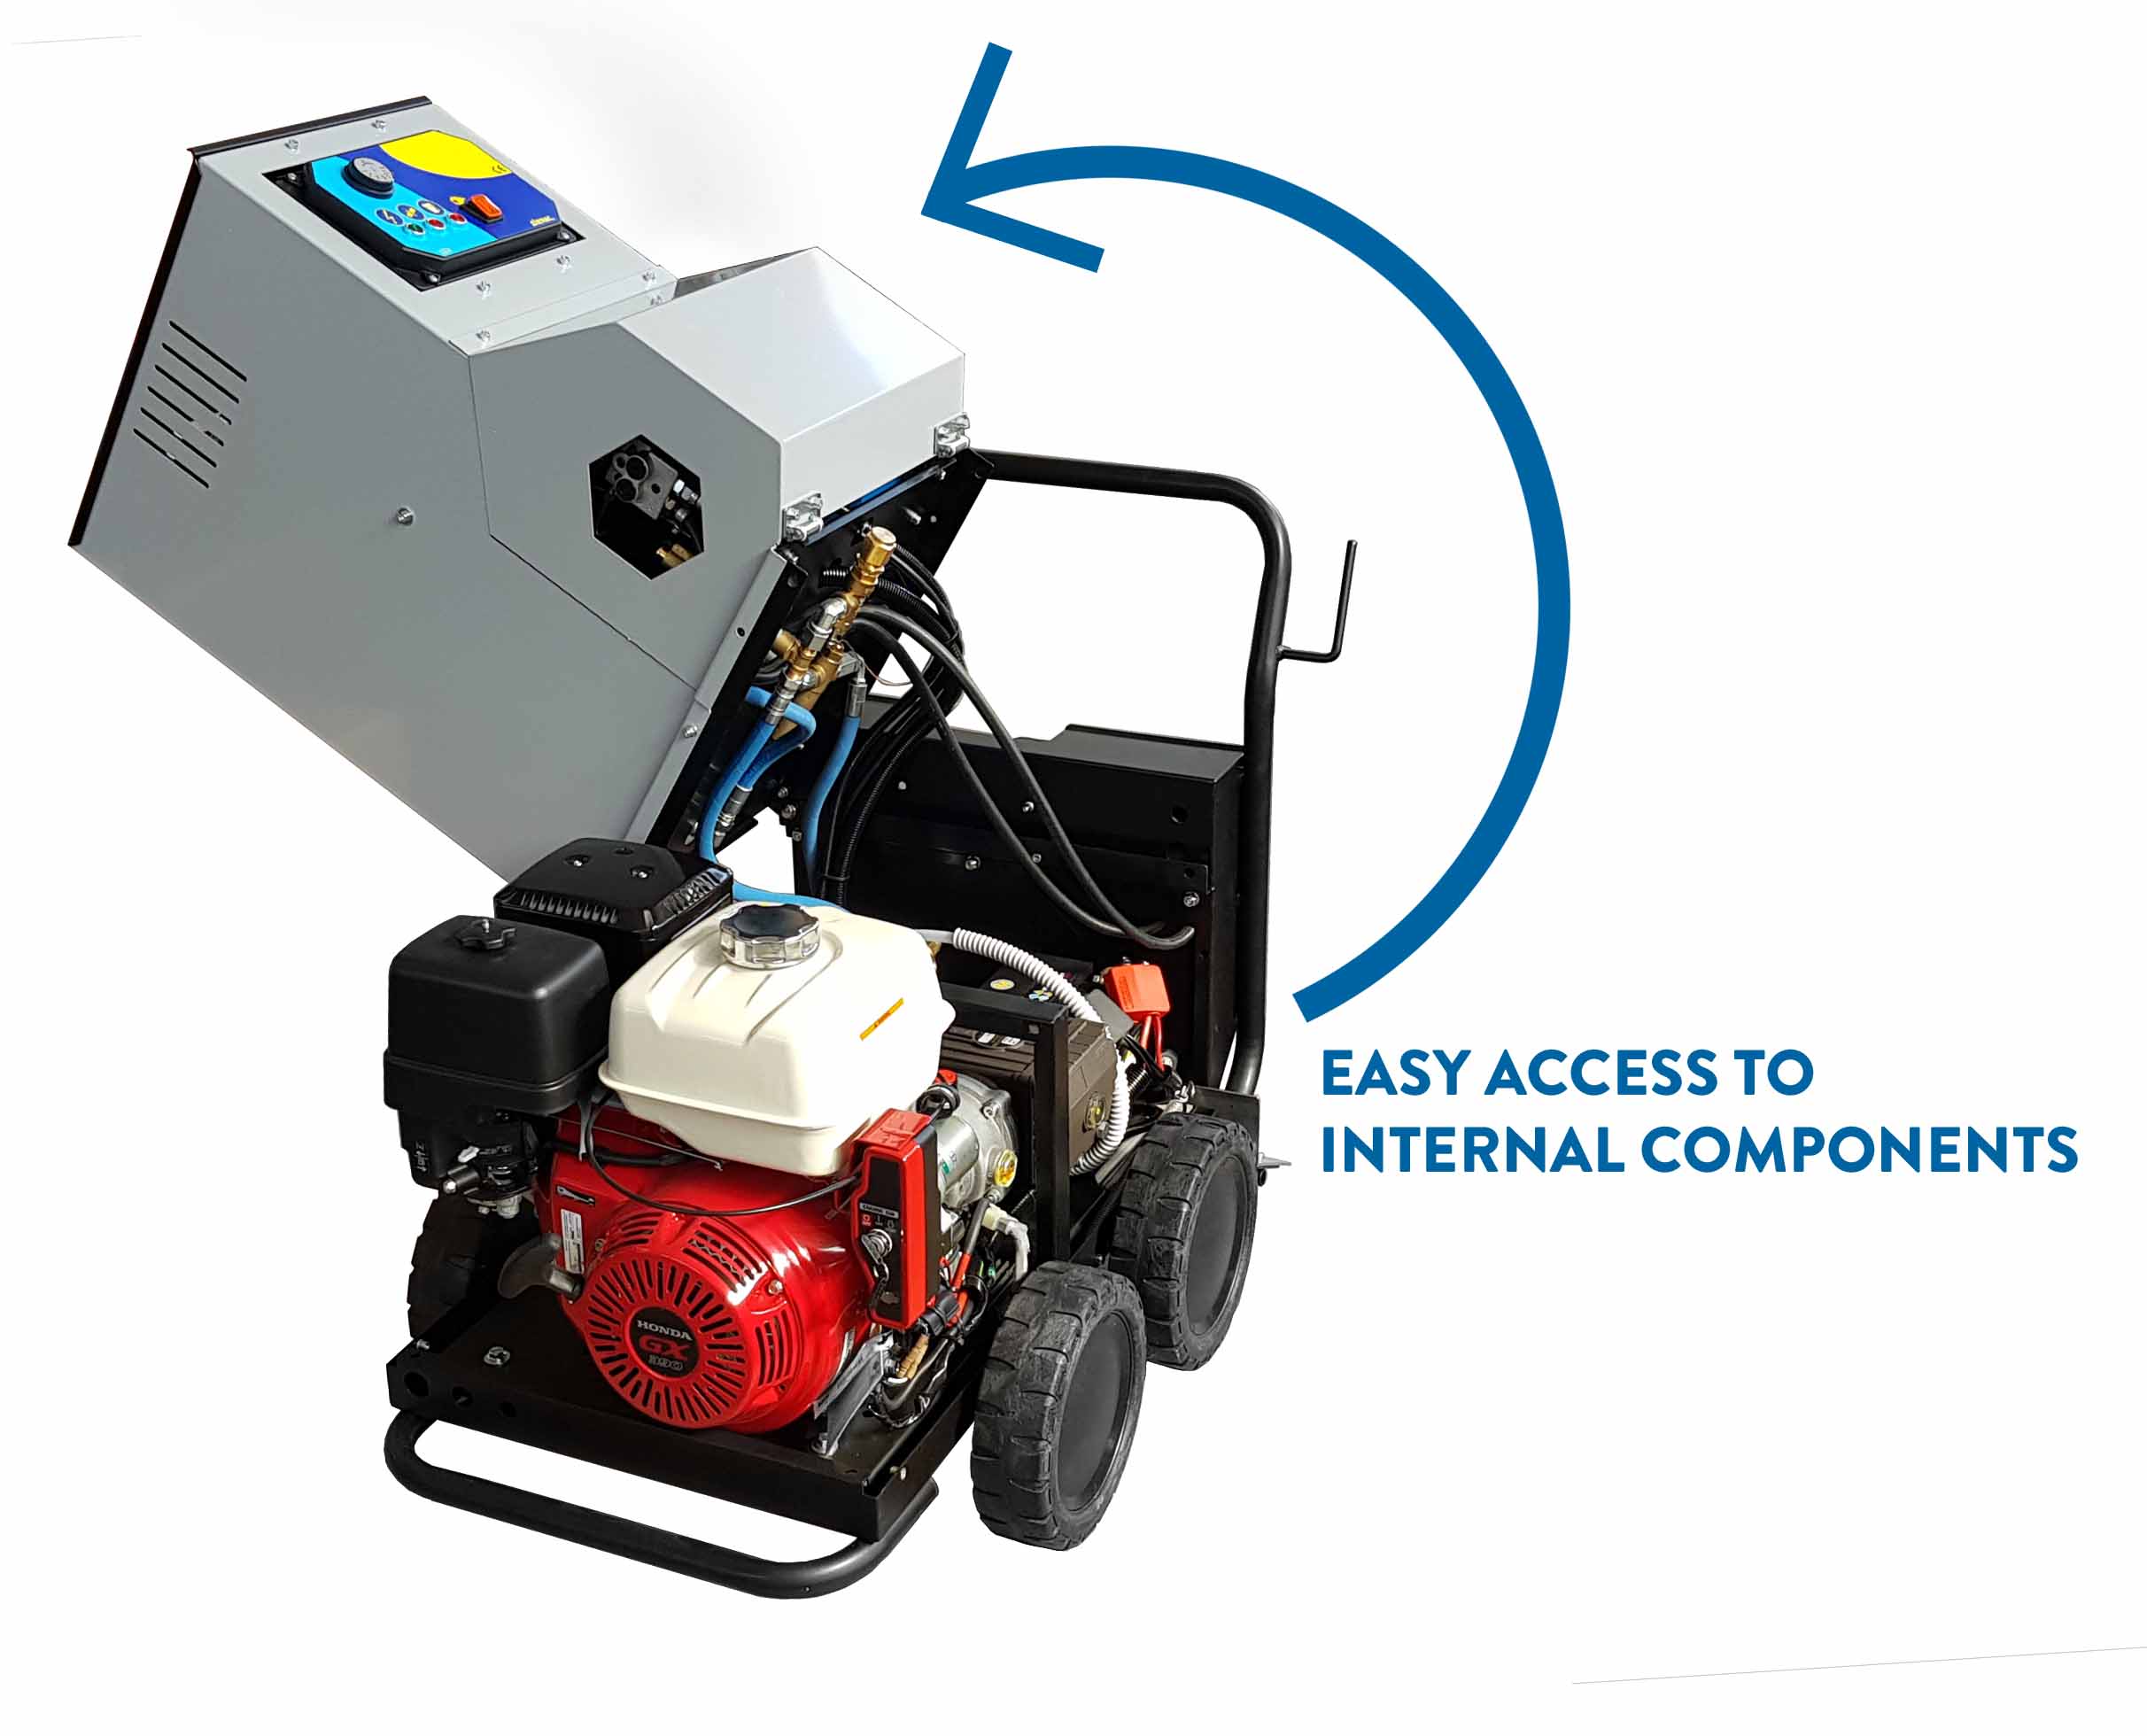 INDEPENDENT HOT WATER HIGH-PRESSURE WASHERS